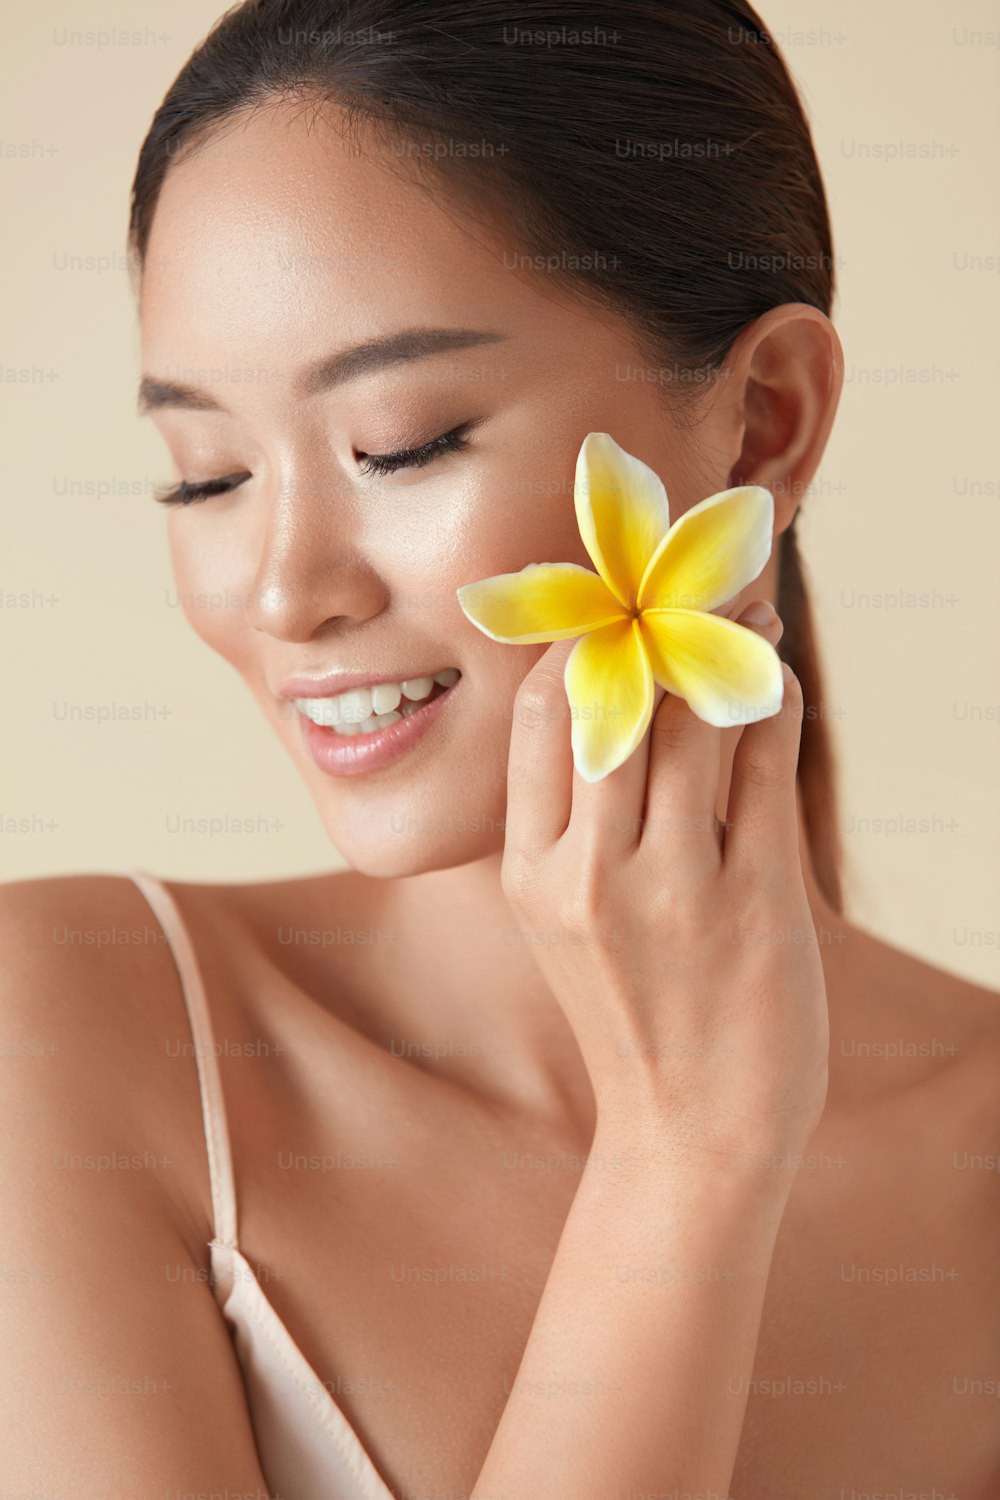 Woman. Beauty And Flower Portrait. Asian Model With Closed Eyes Holding Plumeria Near Face. Natural Treatment In SPA Salon For Healthy, Glowing Hydrated Facial Skin And  Perfect Body.